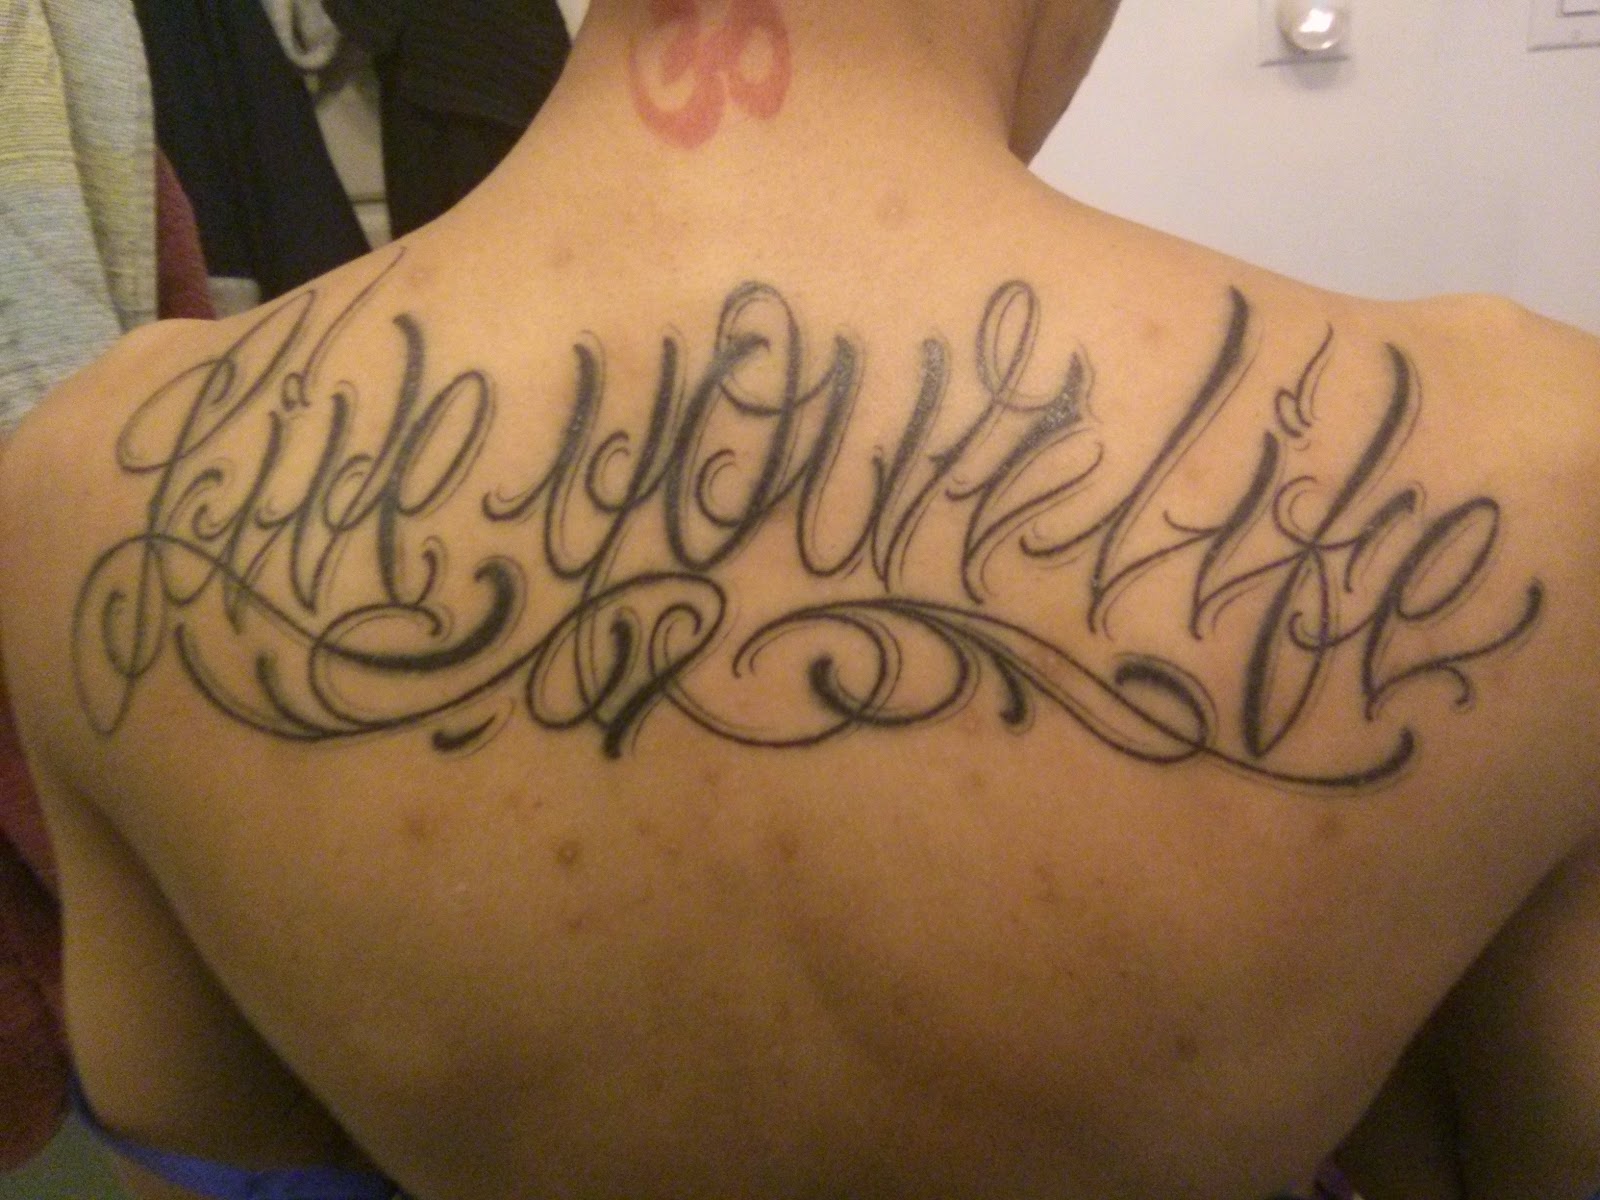 my new ink "live your life" tattoo on back copyright 2014 by OneQuarterMama.ca